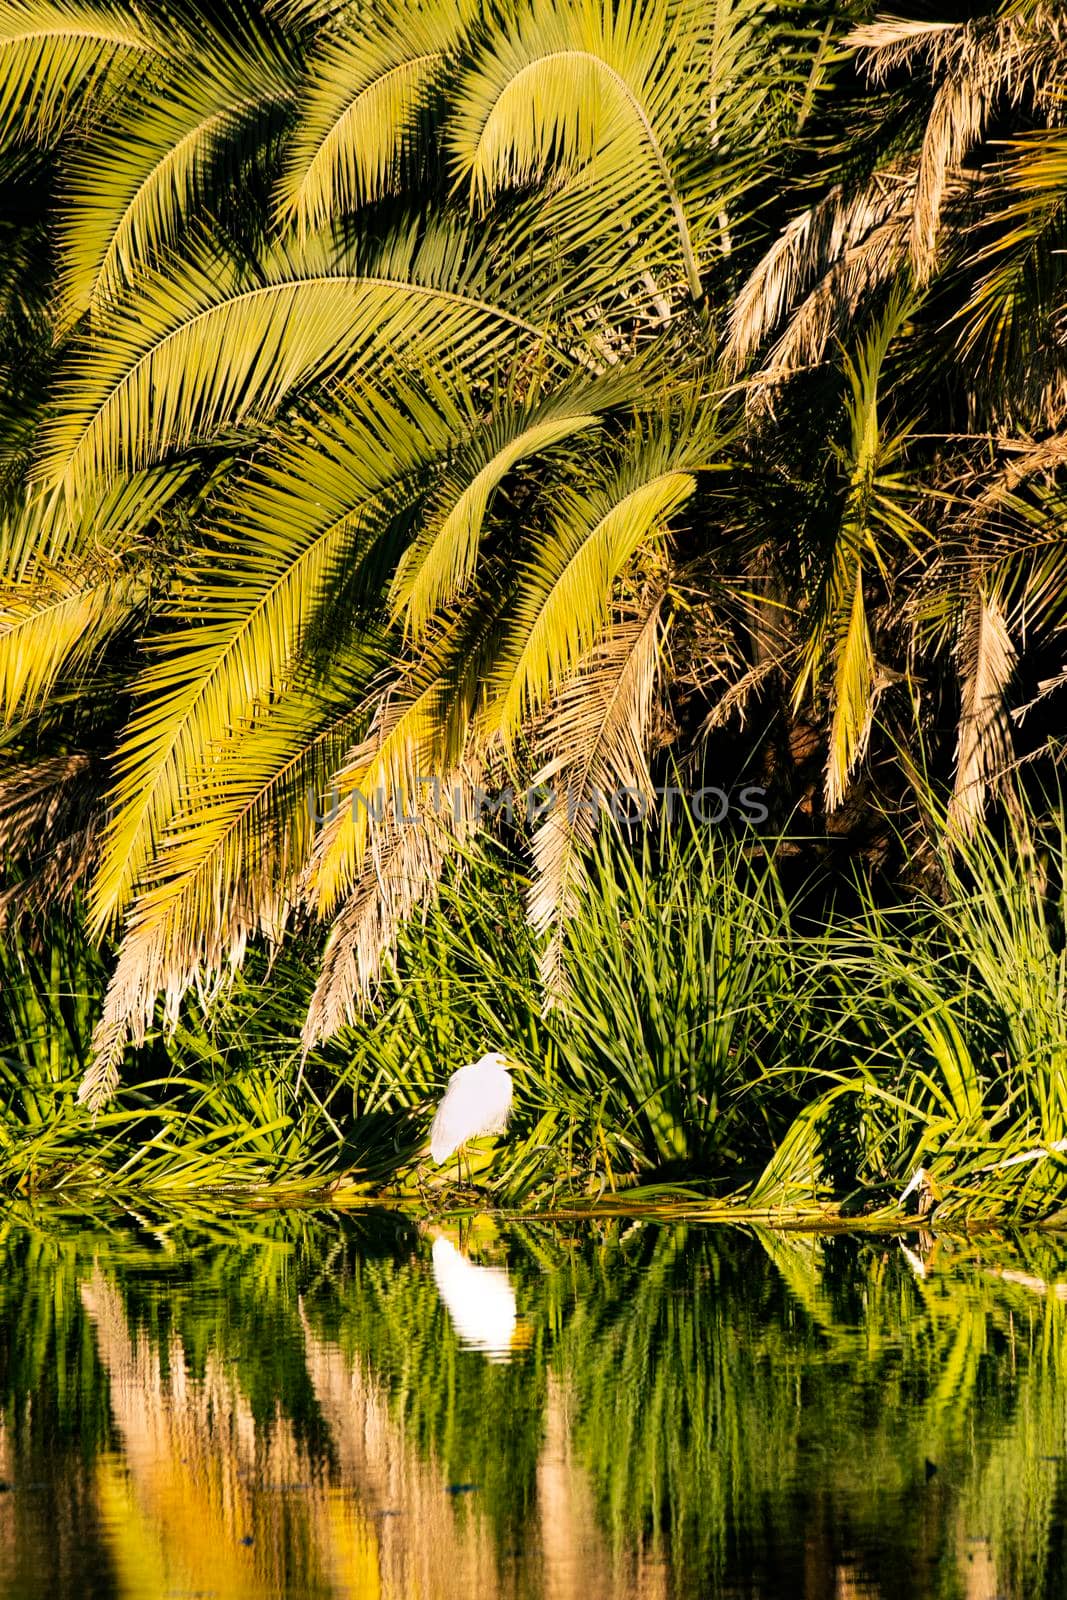 Bright white bird stands alone on an island surrounded by beautiful green and yellow palm tree leaves, with a contrasting reflection in the water of a lake. Centennial Park, Sydney, Australia